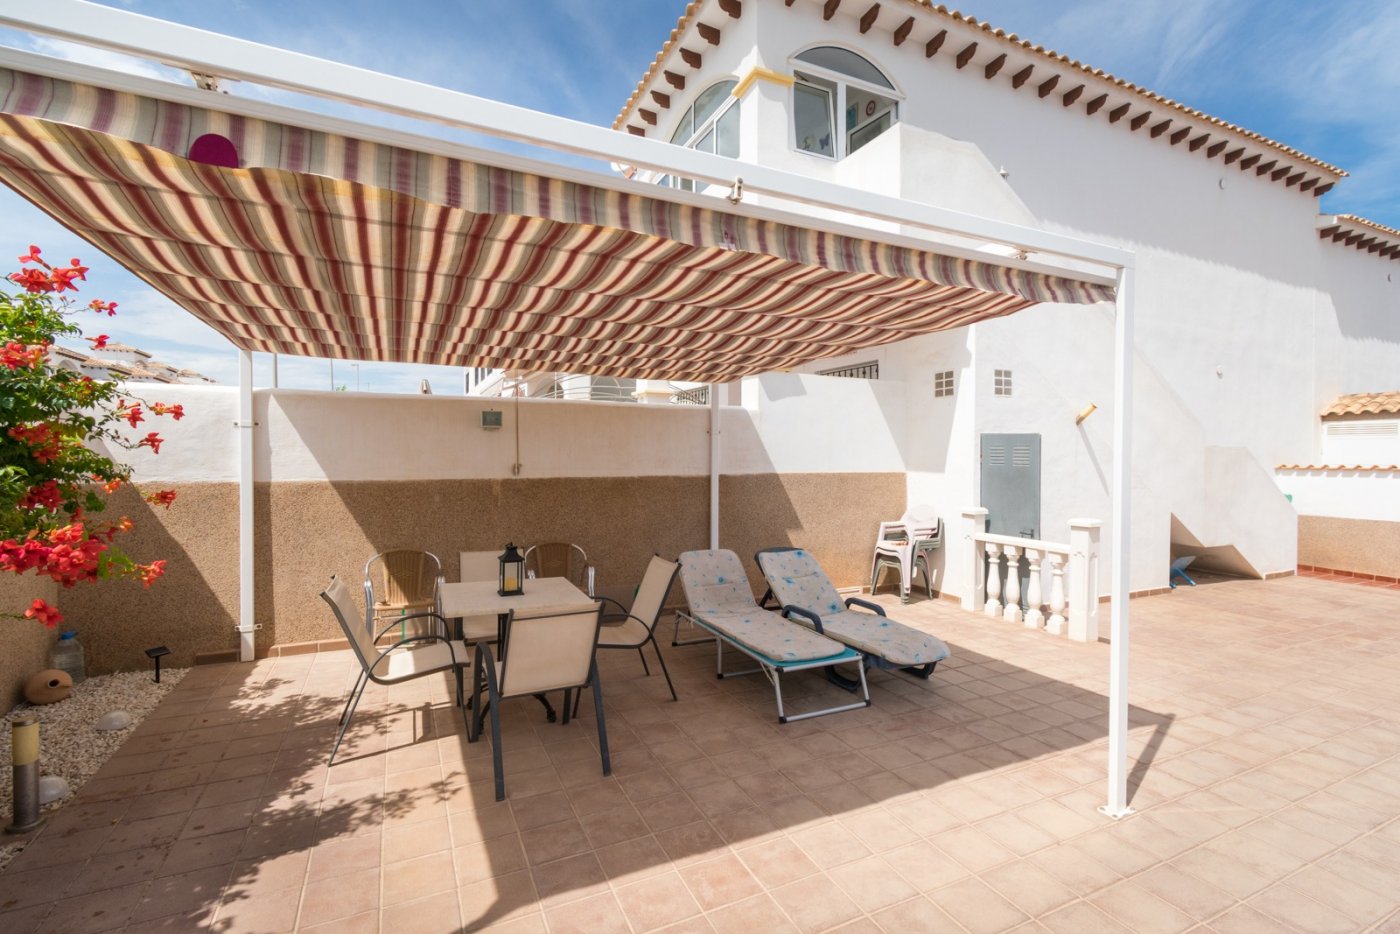 Upstairs apartment for sale with garden, roof terrace and parking space in Punta Prima.